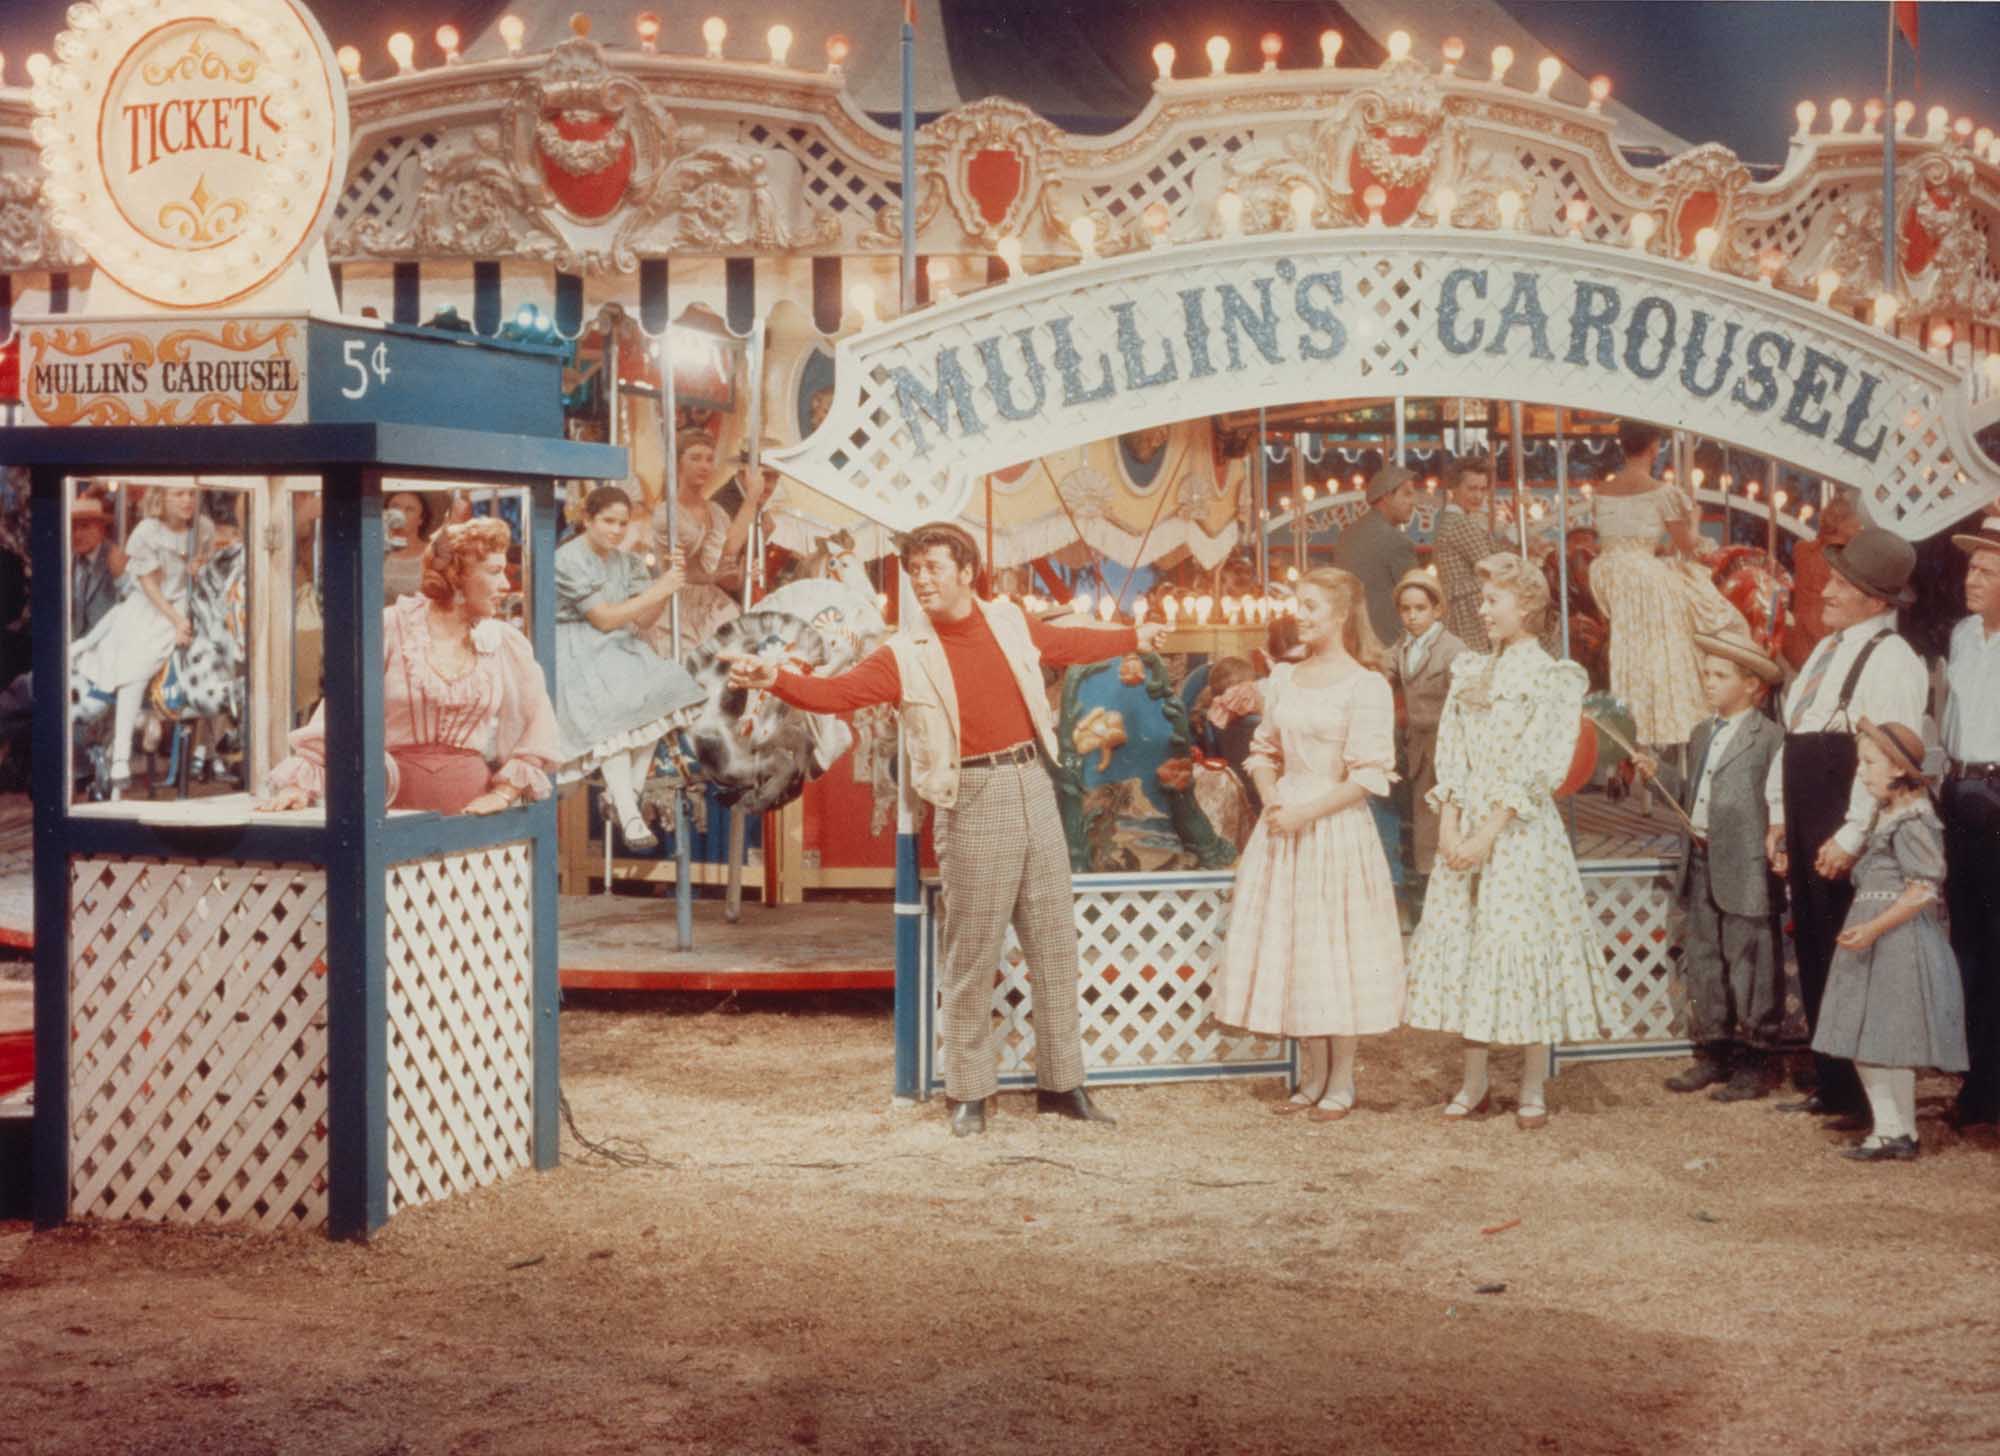 A photo from the 1956 film version of Carousel.